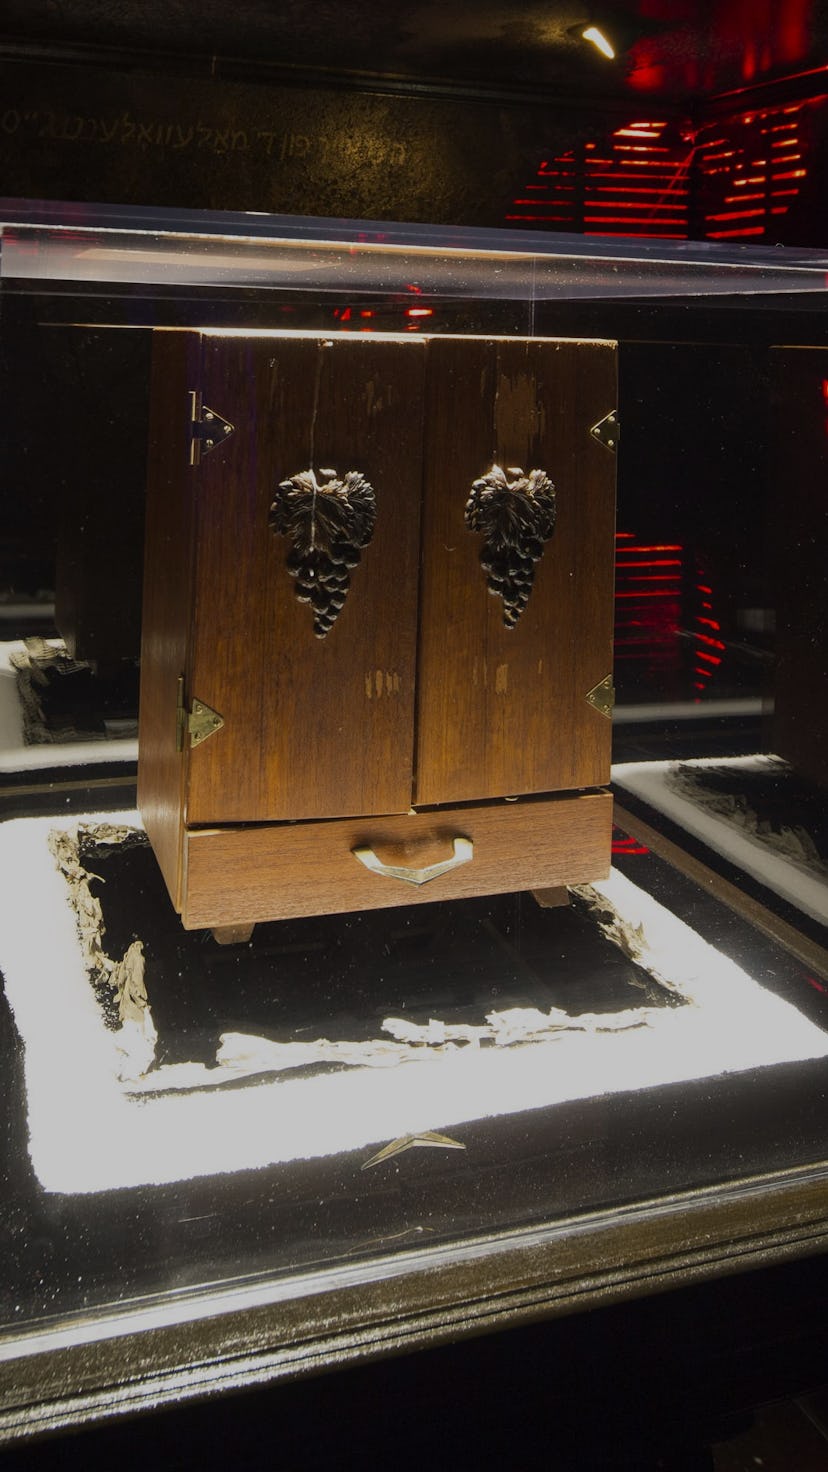 The Dybbuk Box on display at the Haunted Museum in Las Vegas